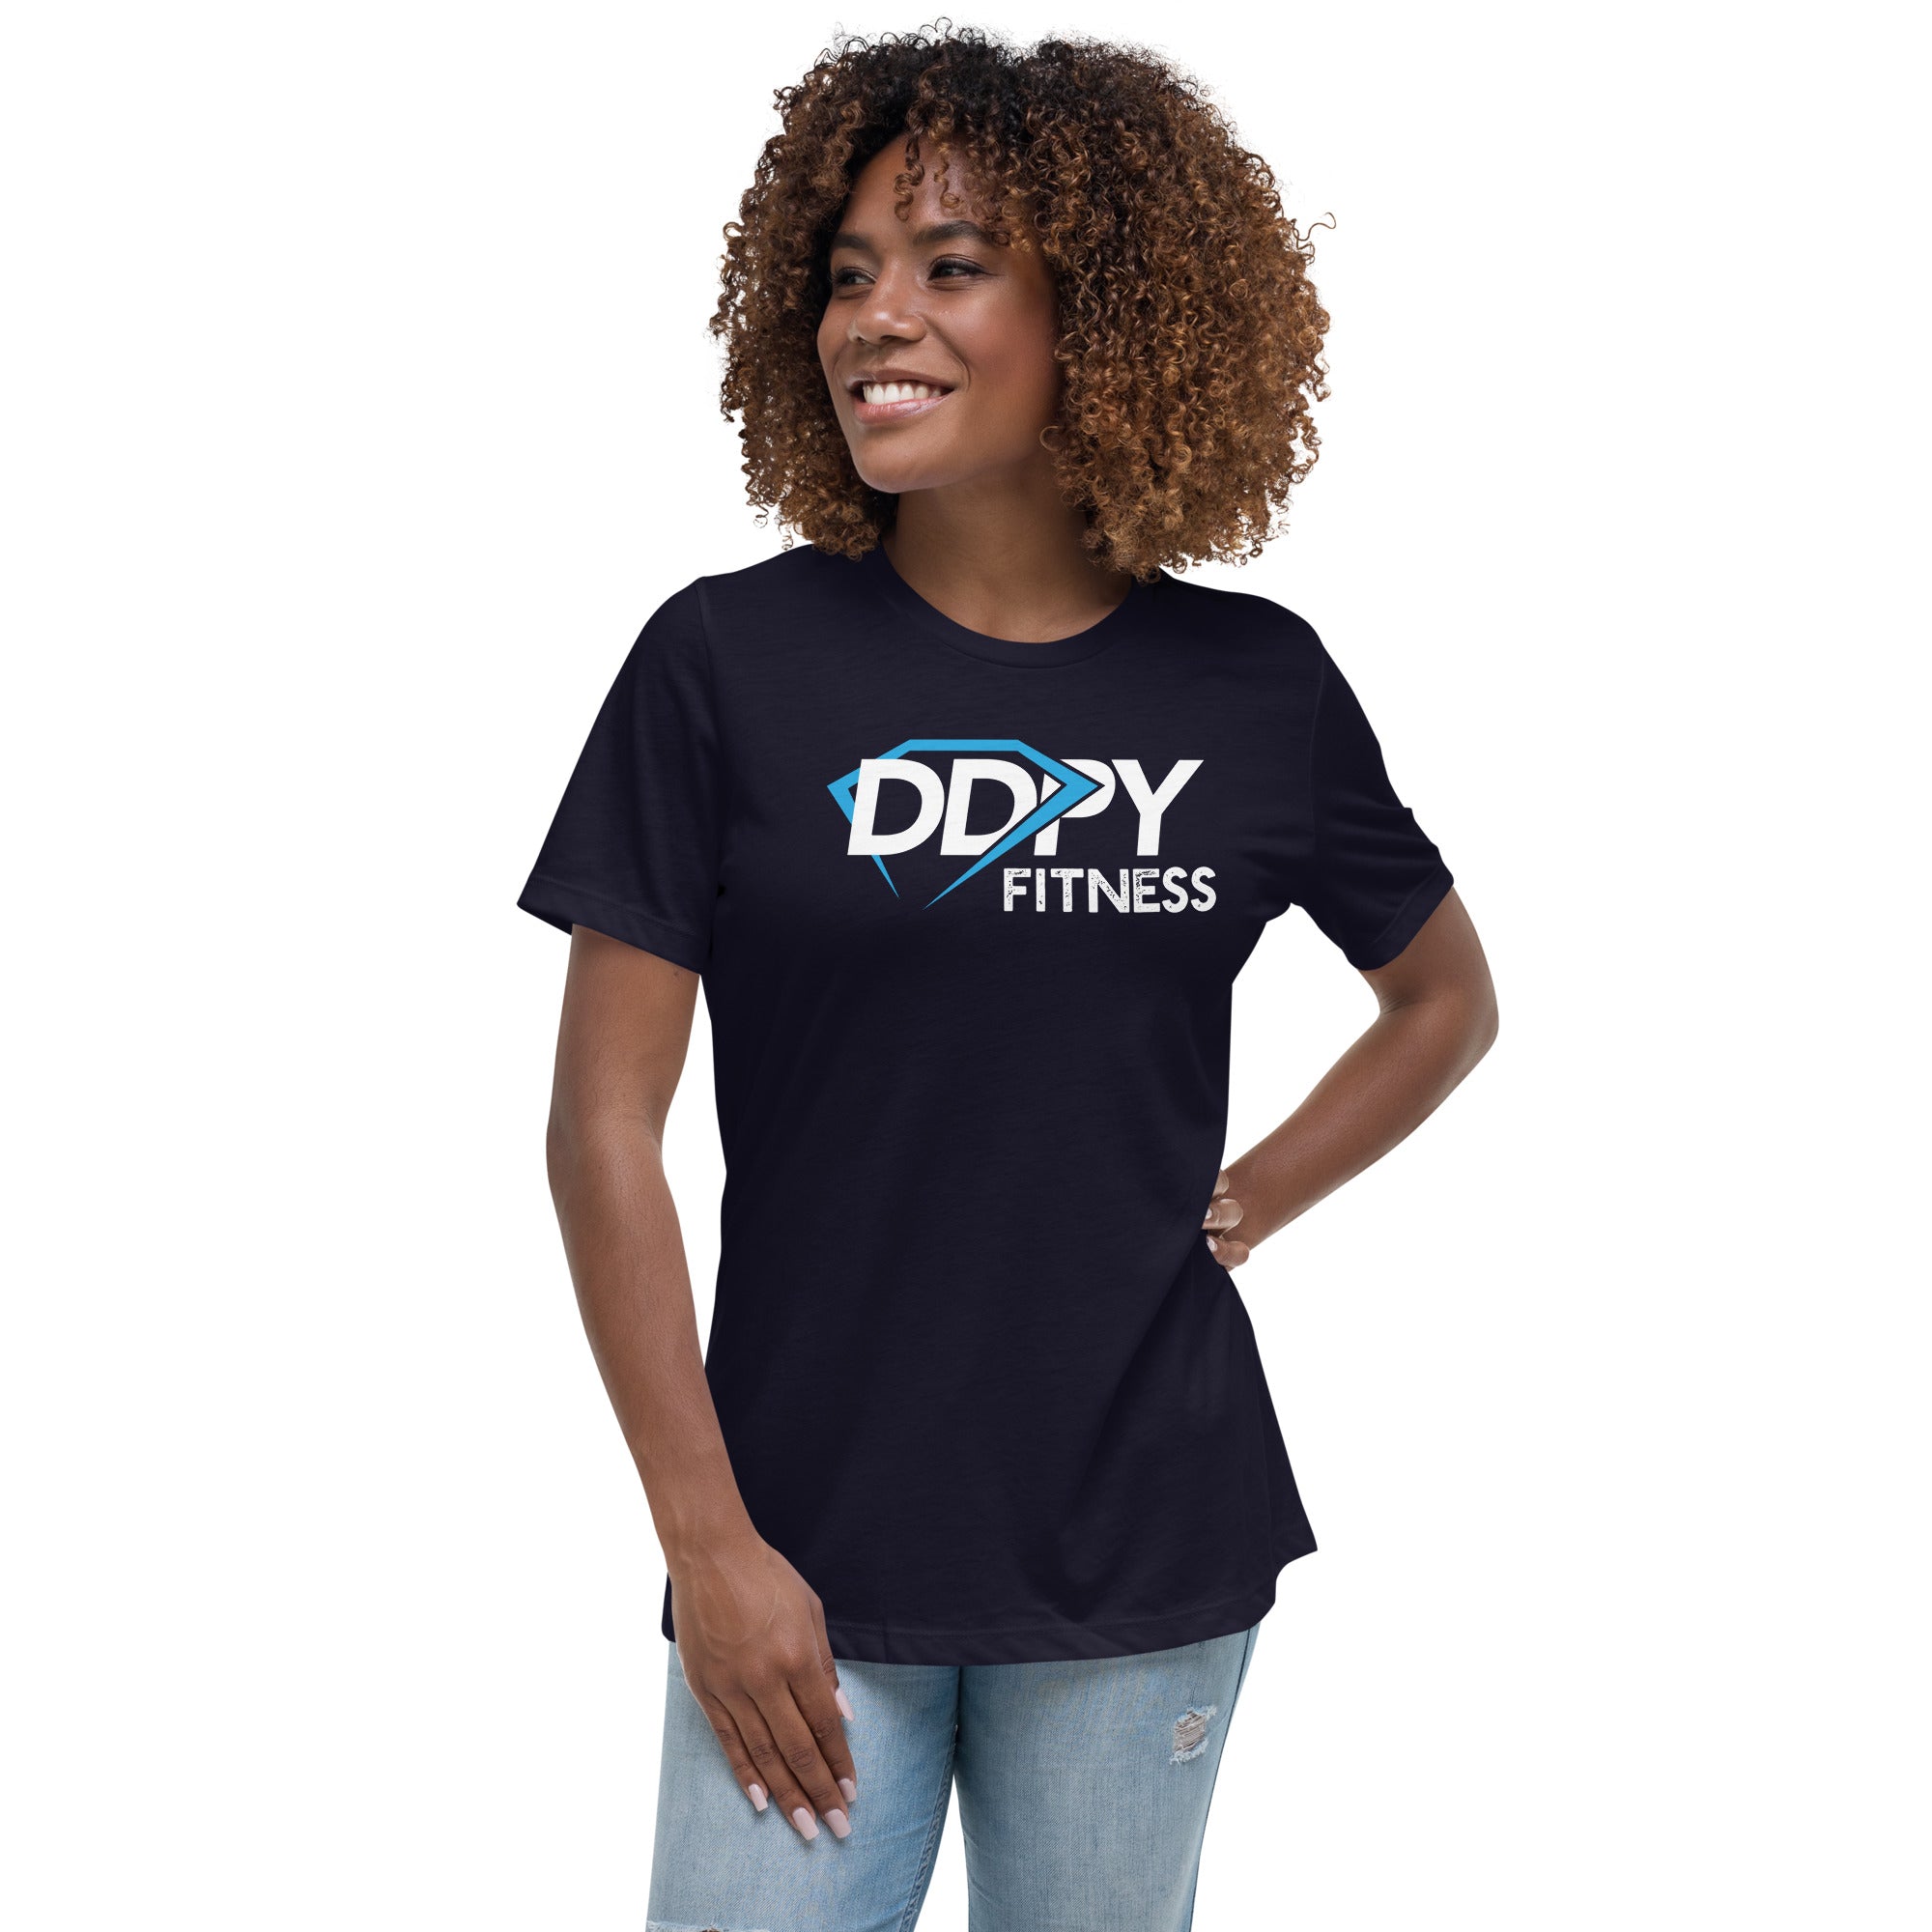 DDPY Fitness Women's Relaxed T-Shirt (On Demand Printing)